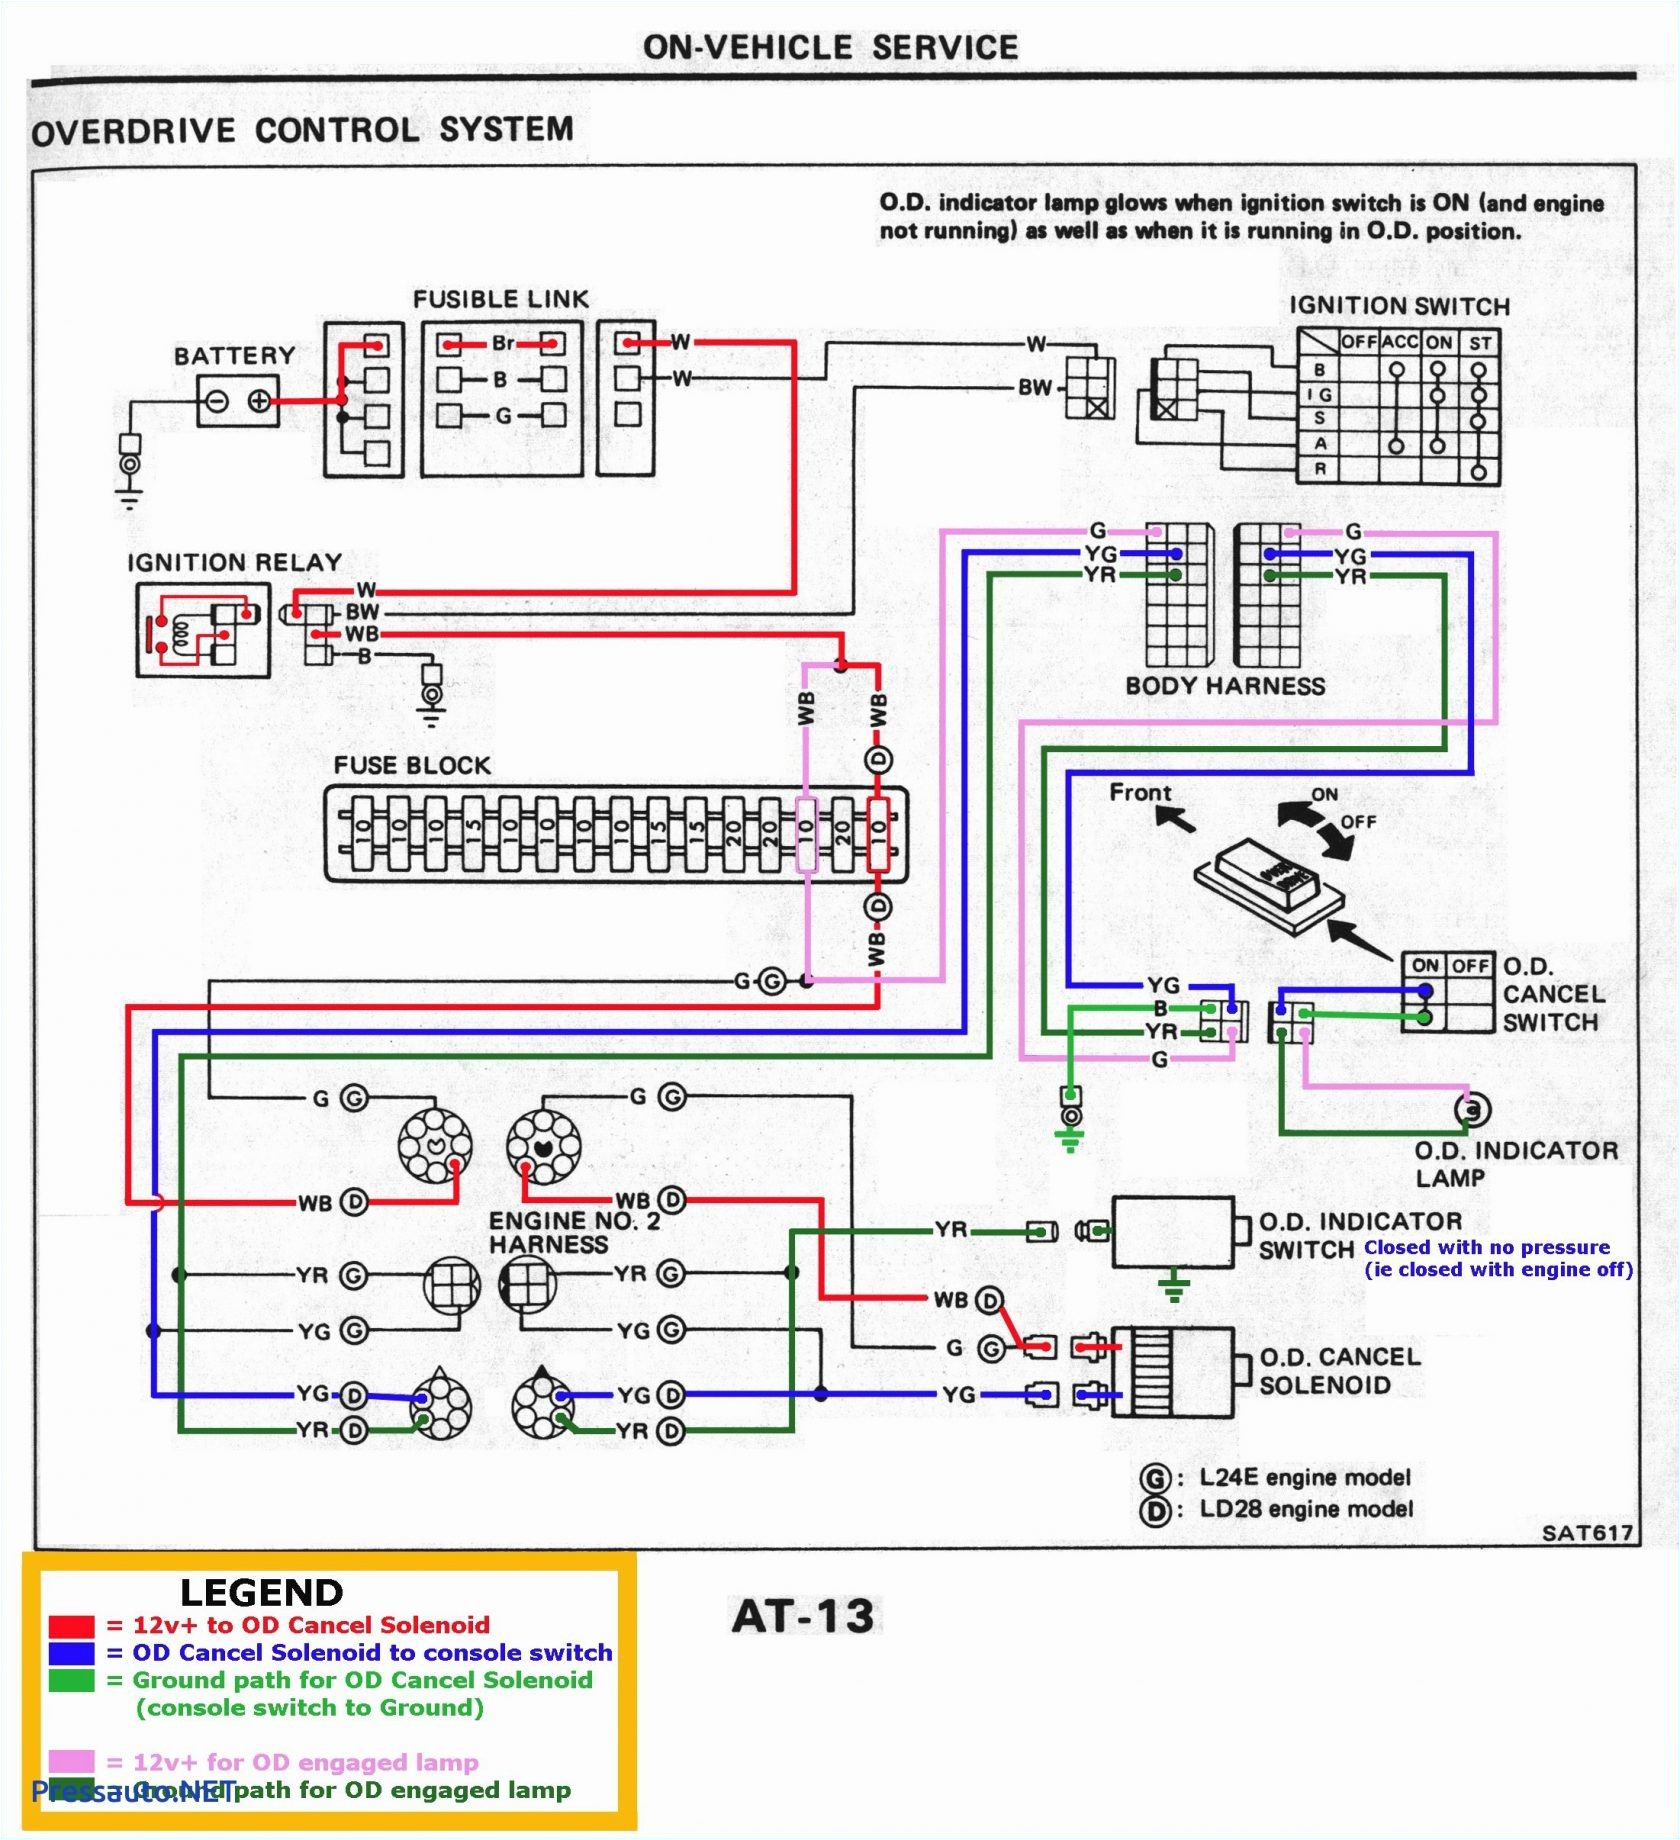 2001 Suburban Stereo Wiring Diagram from autocardesign.org